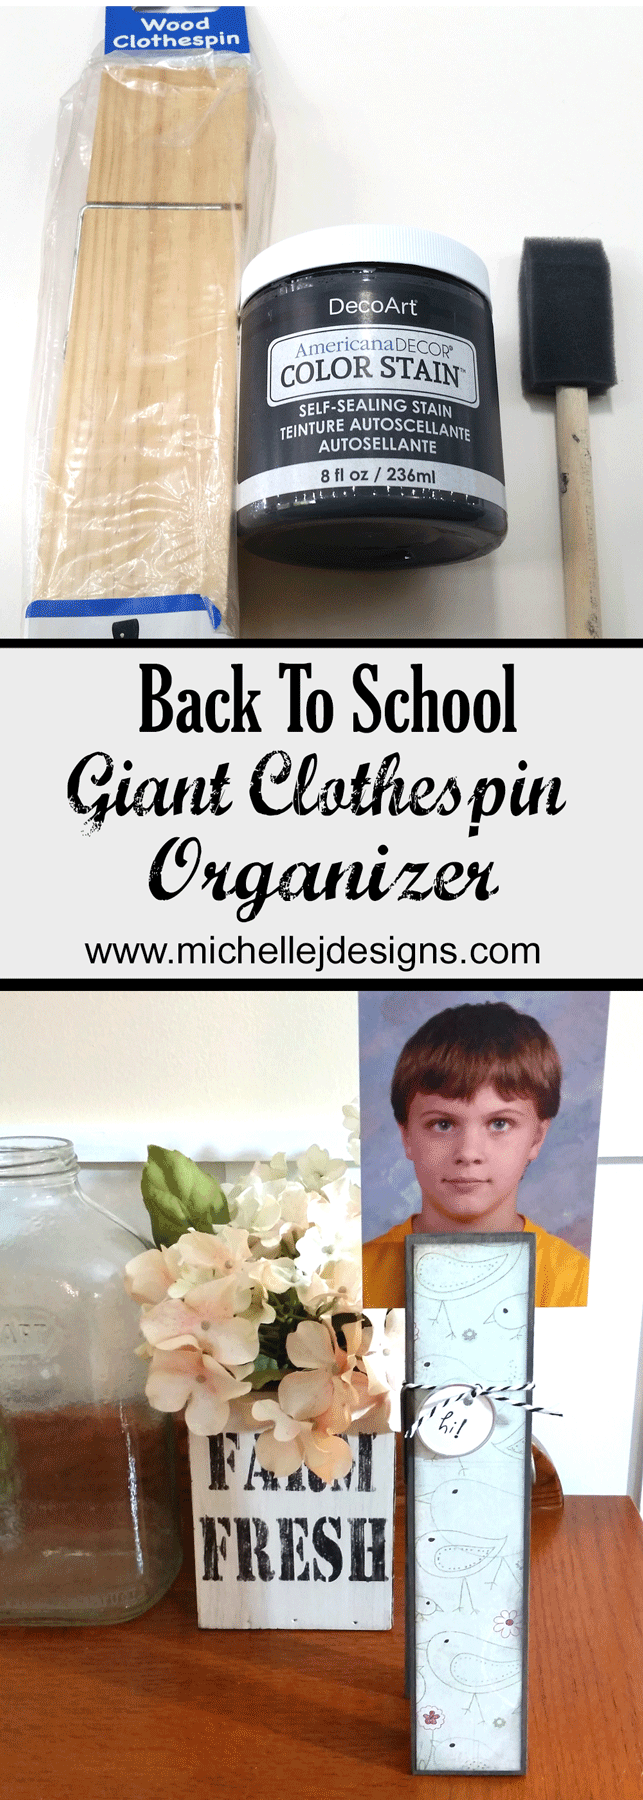 This giant clothespin organizer is perfect for remembering forms and permission slips to holding photos. Get going on back to school fun right now! - www.michellejdesigns.com